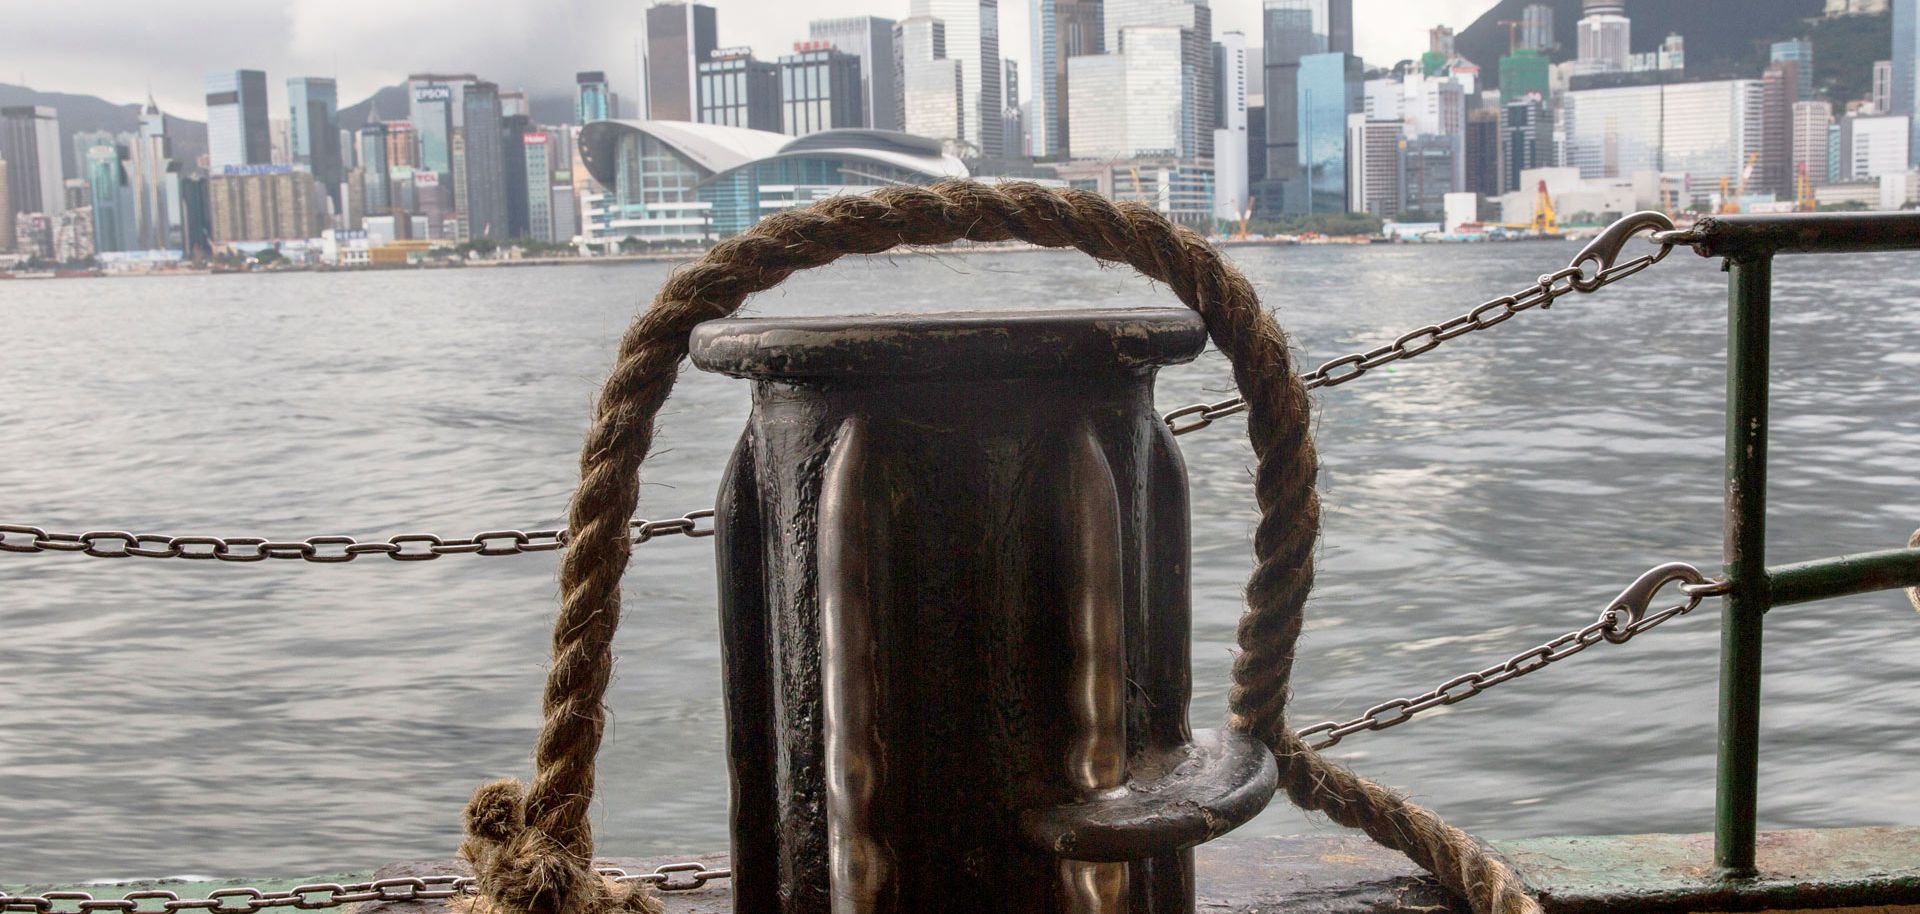 A view of the Hong Kong skyline from the Star Ferry as it crosses to mainland China over Victoria Harbor.